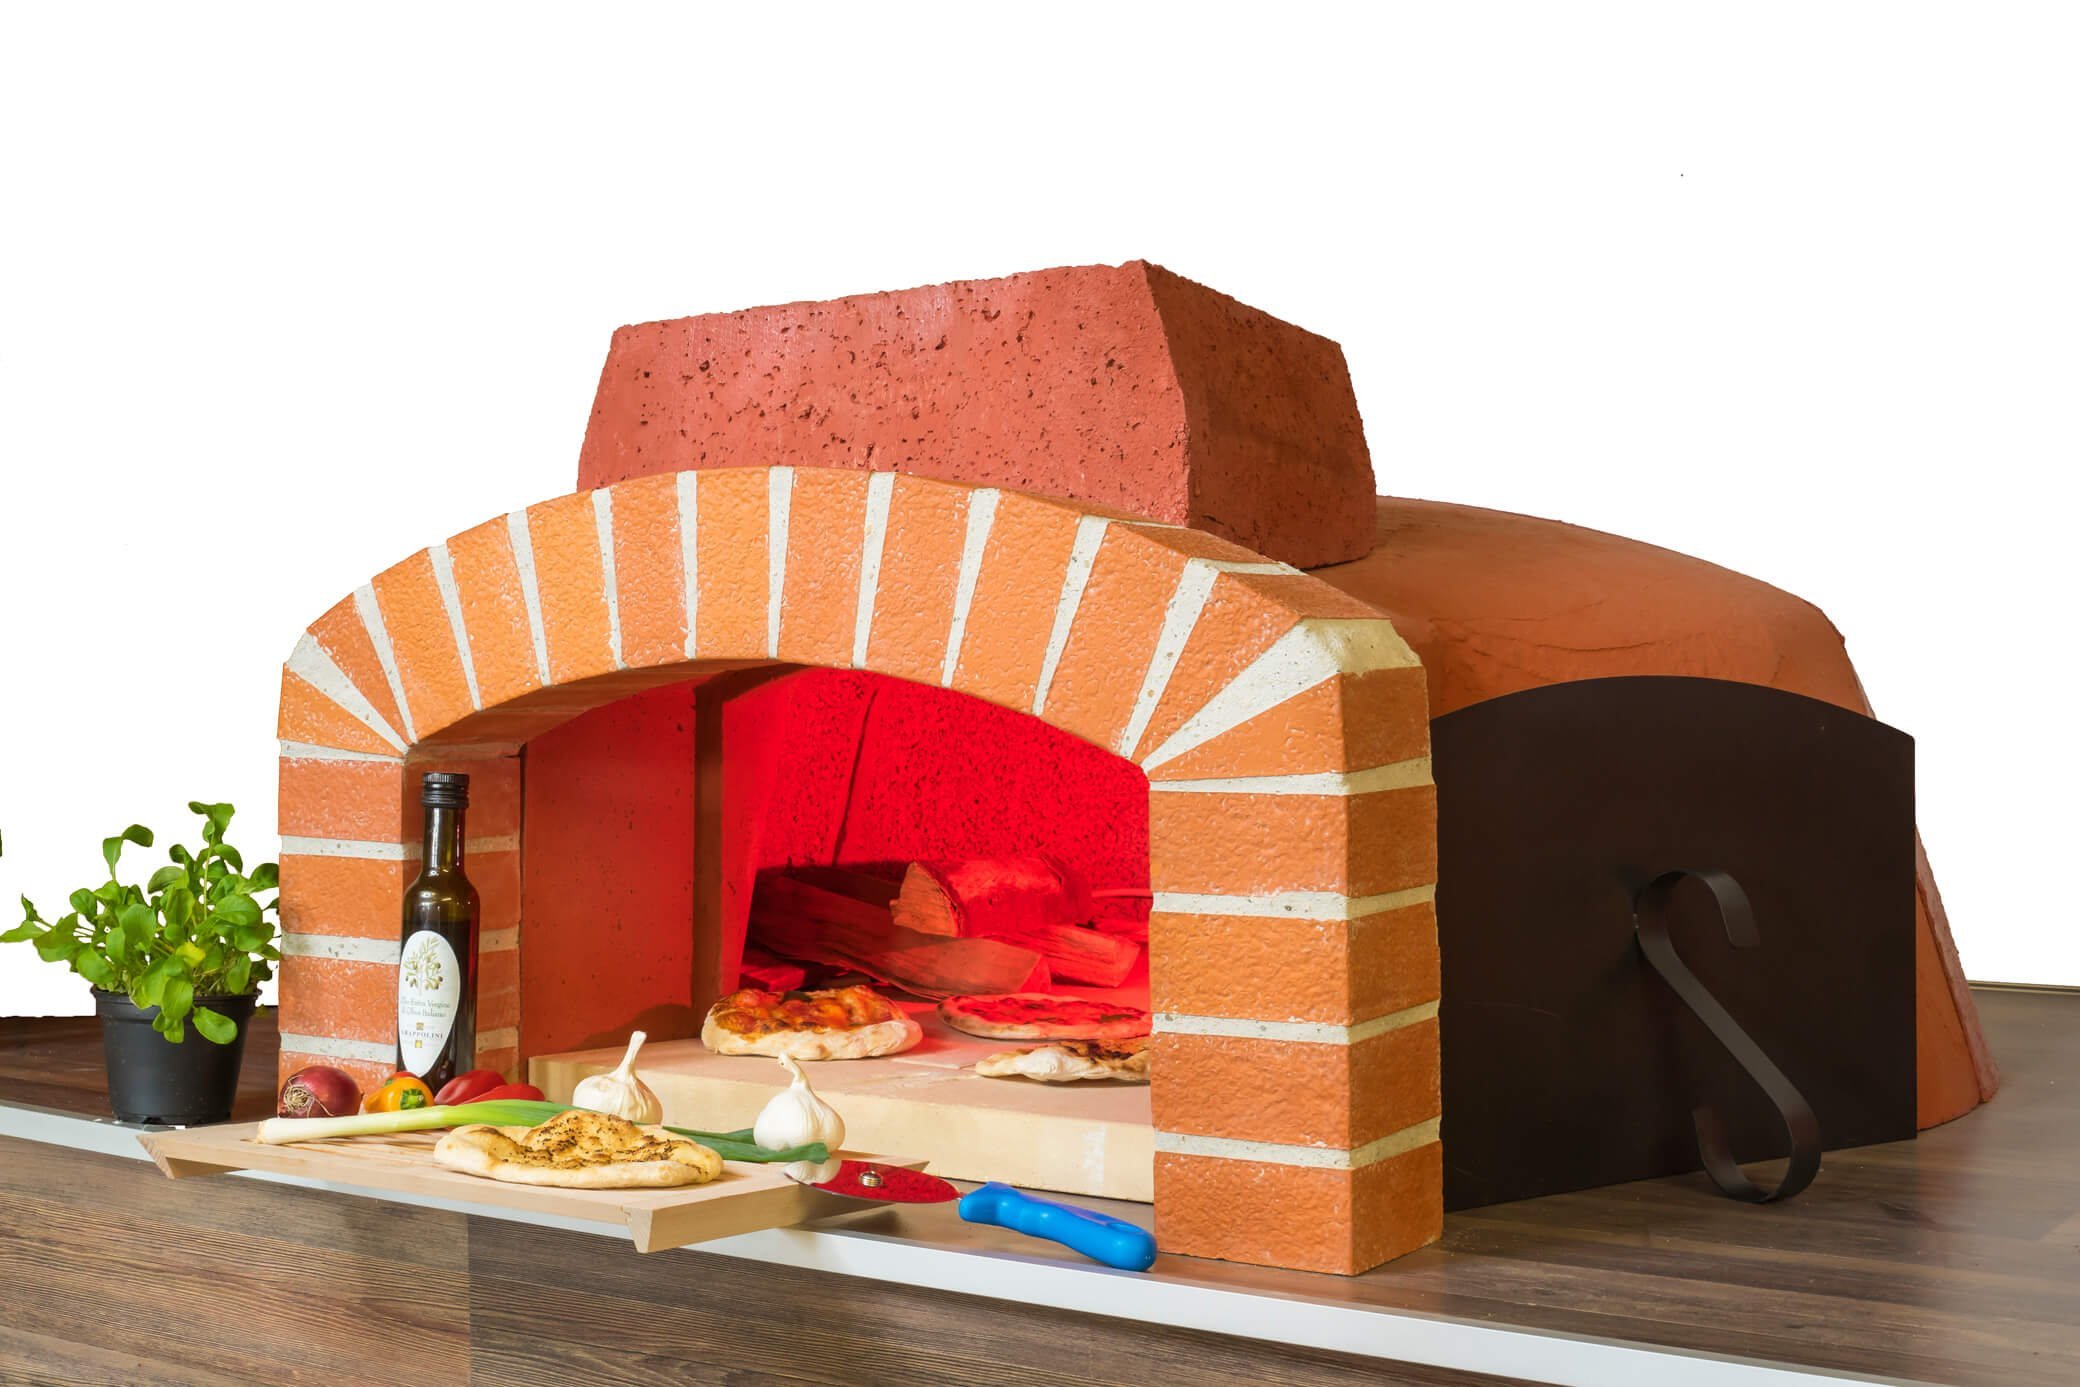 Pizza oven Valoriani FVR kit with smoke connection, brick arch and insulation set.